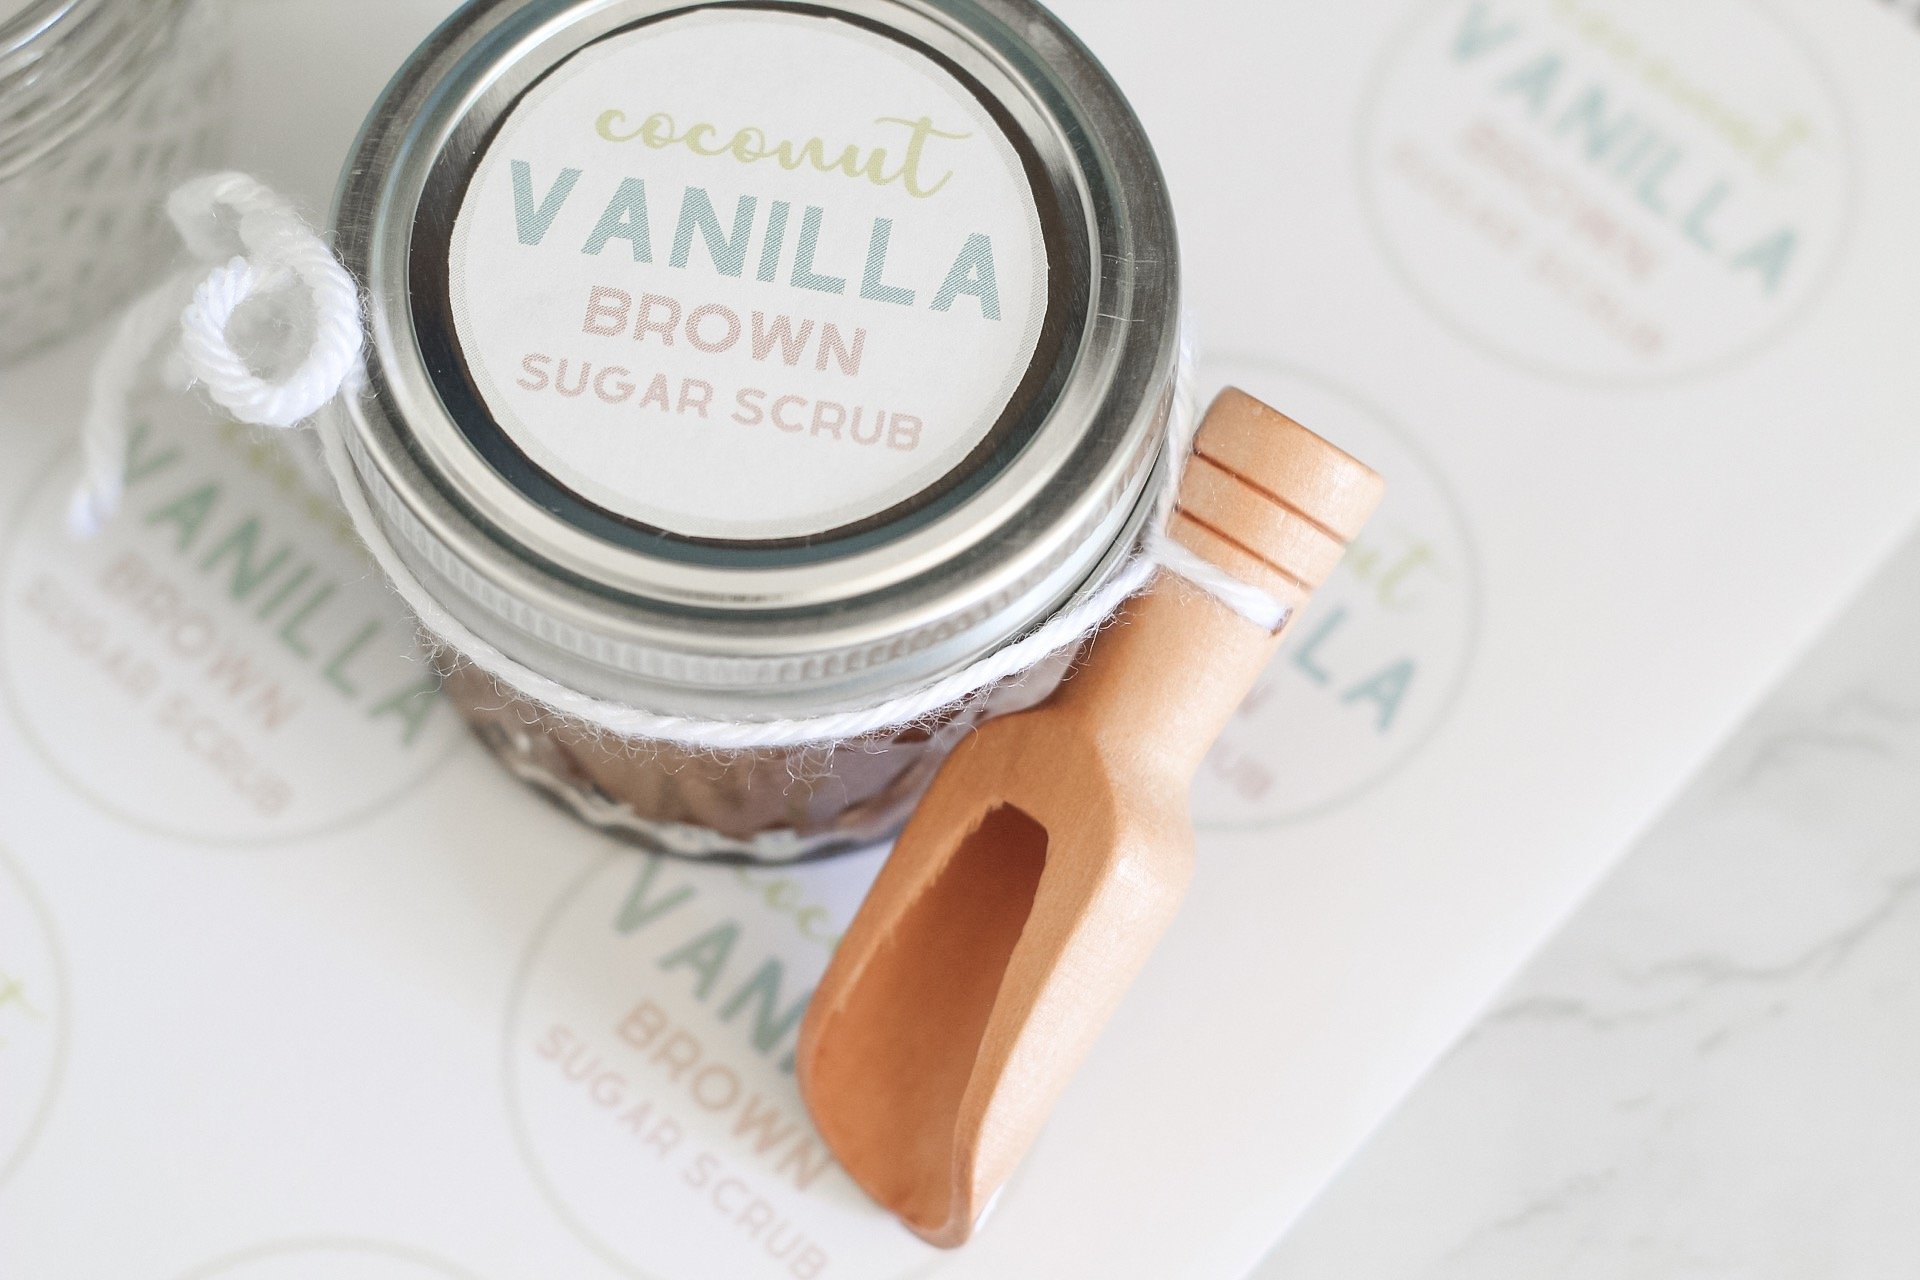 homemade sugar scrub with scoop and label